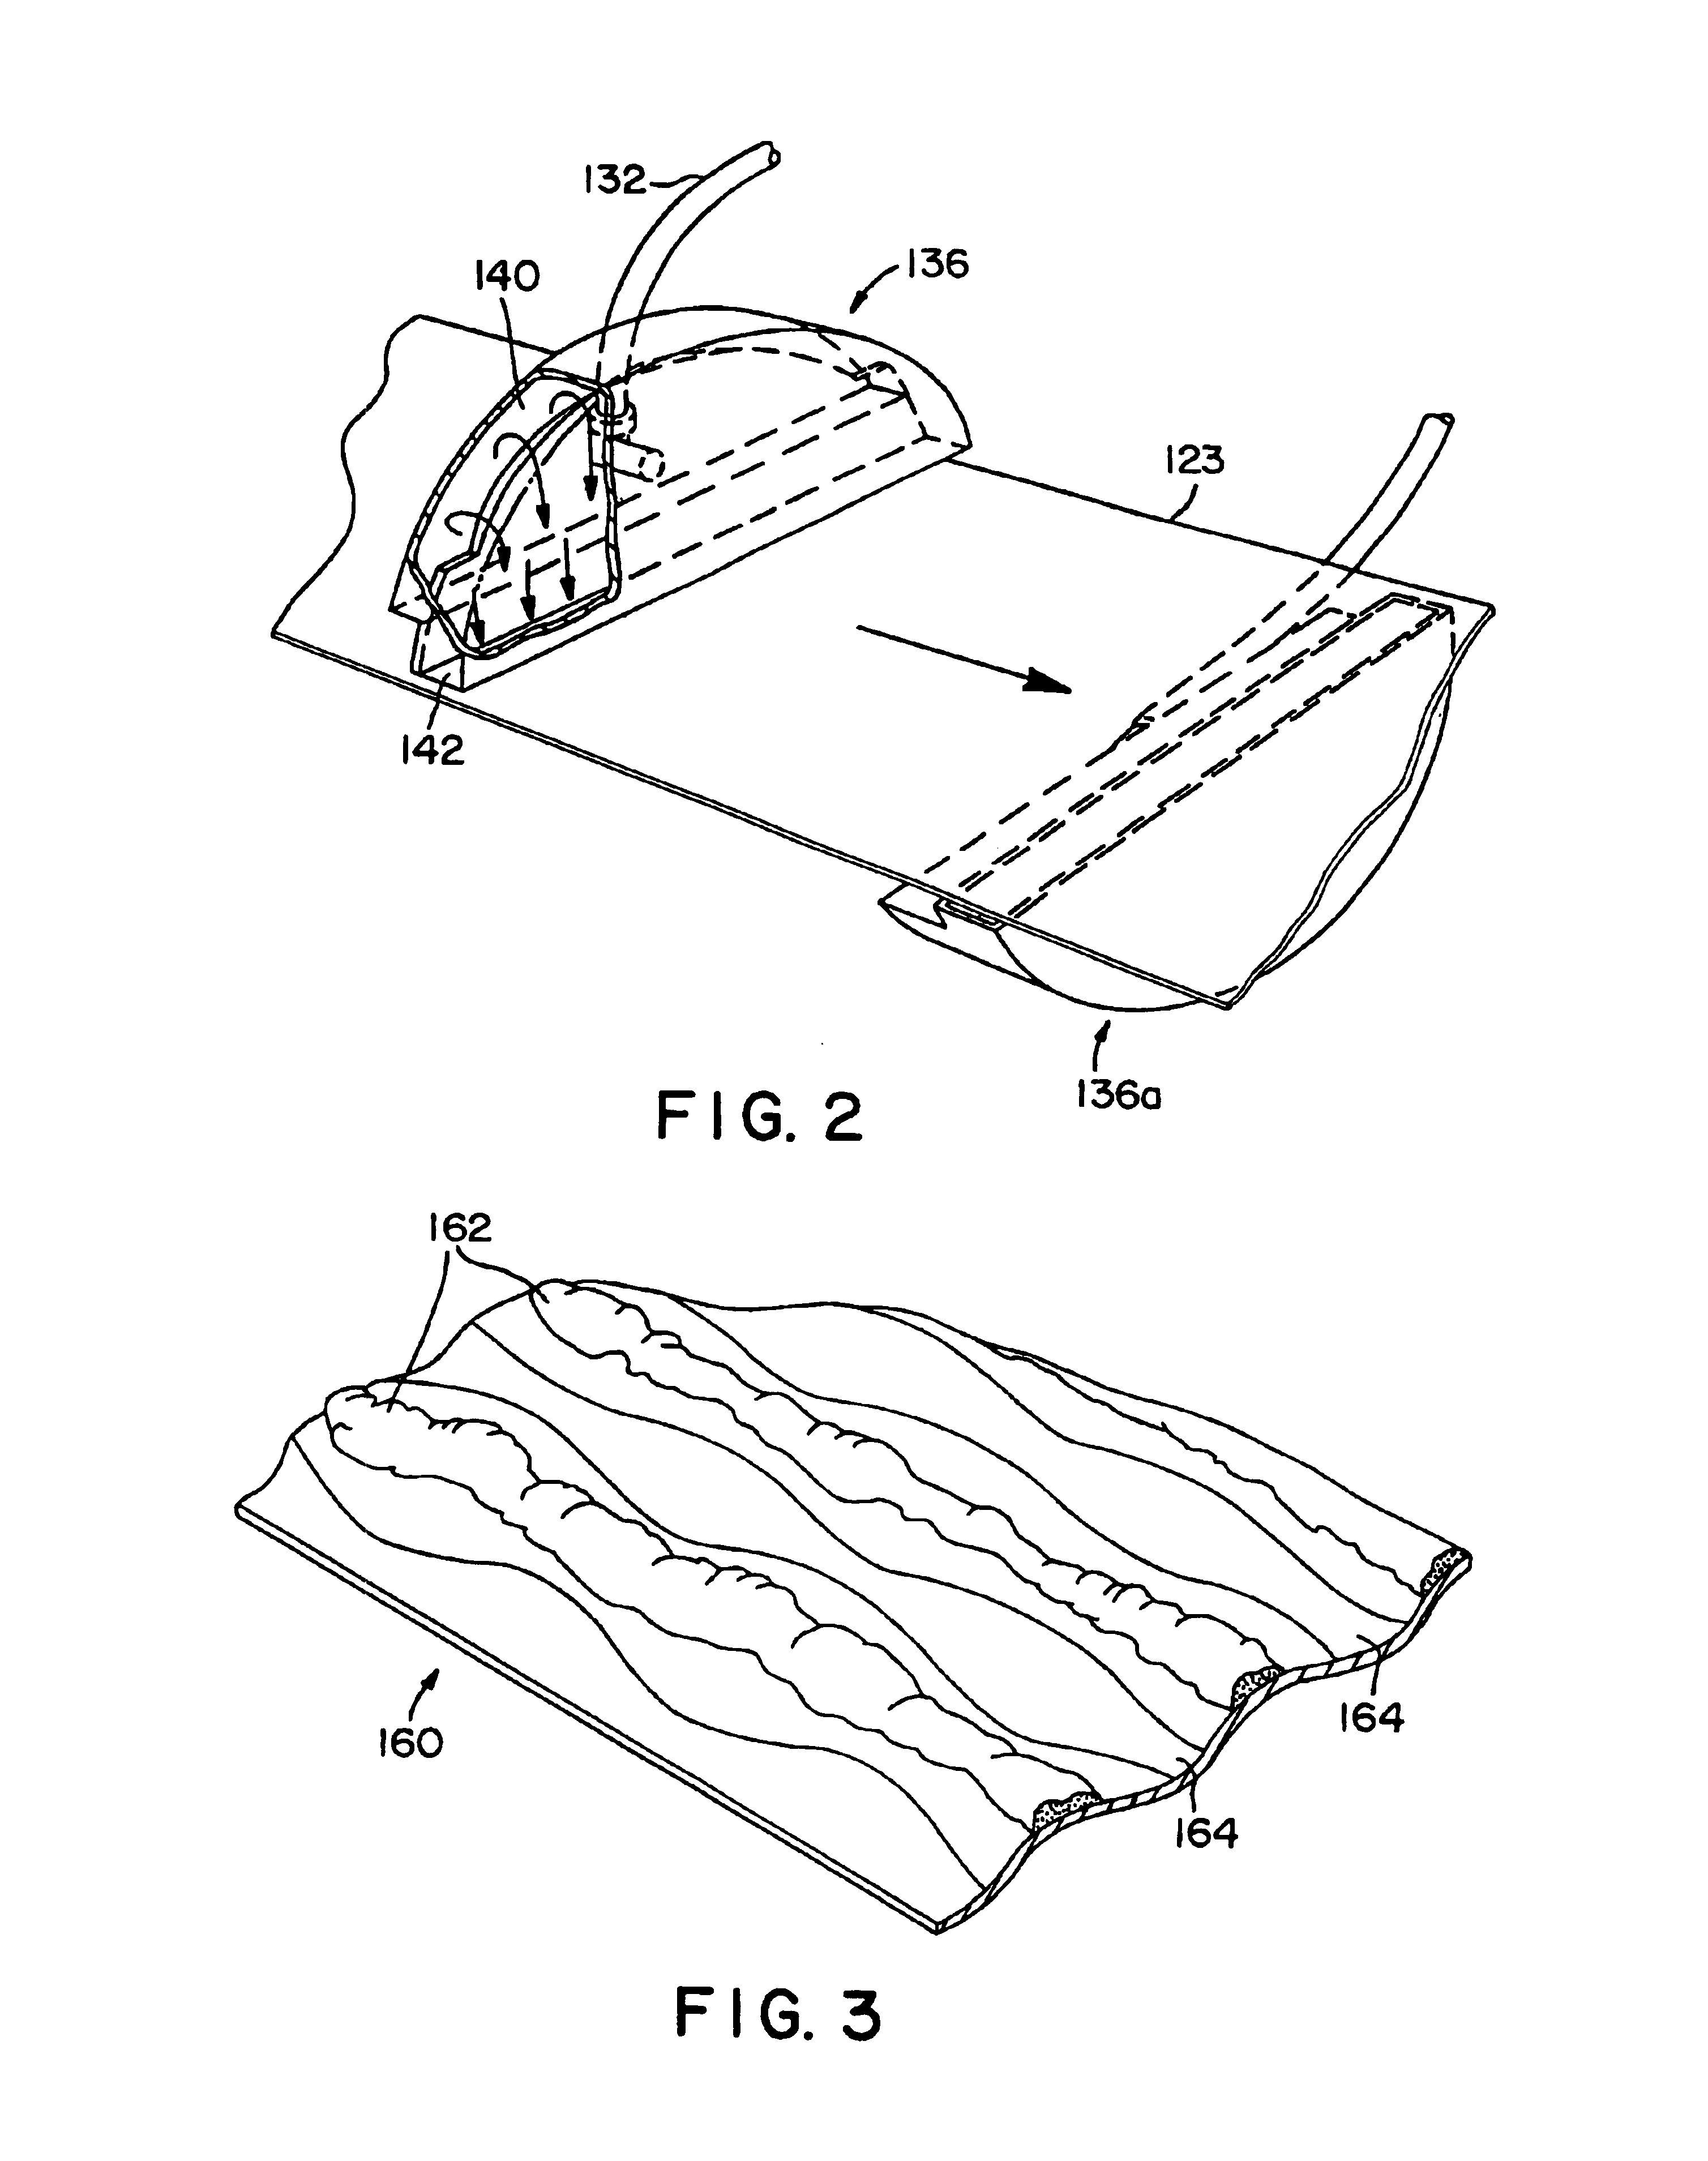 Method for applying softening compositions to a tissue product